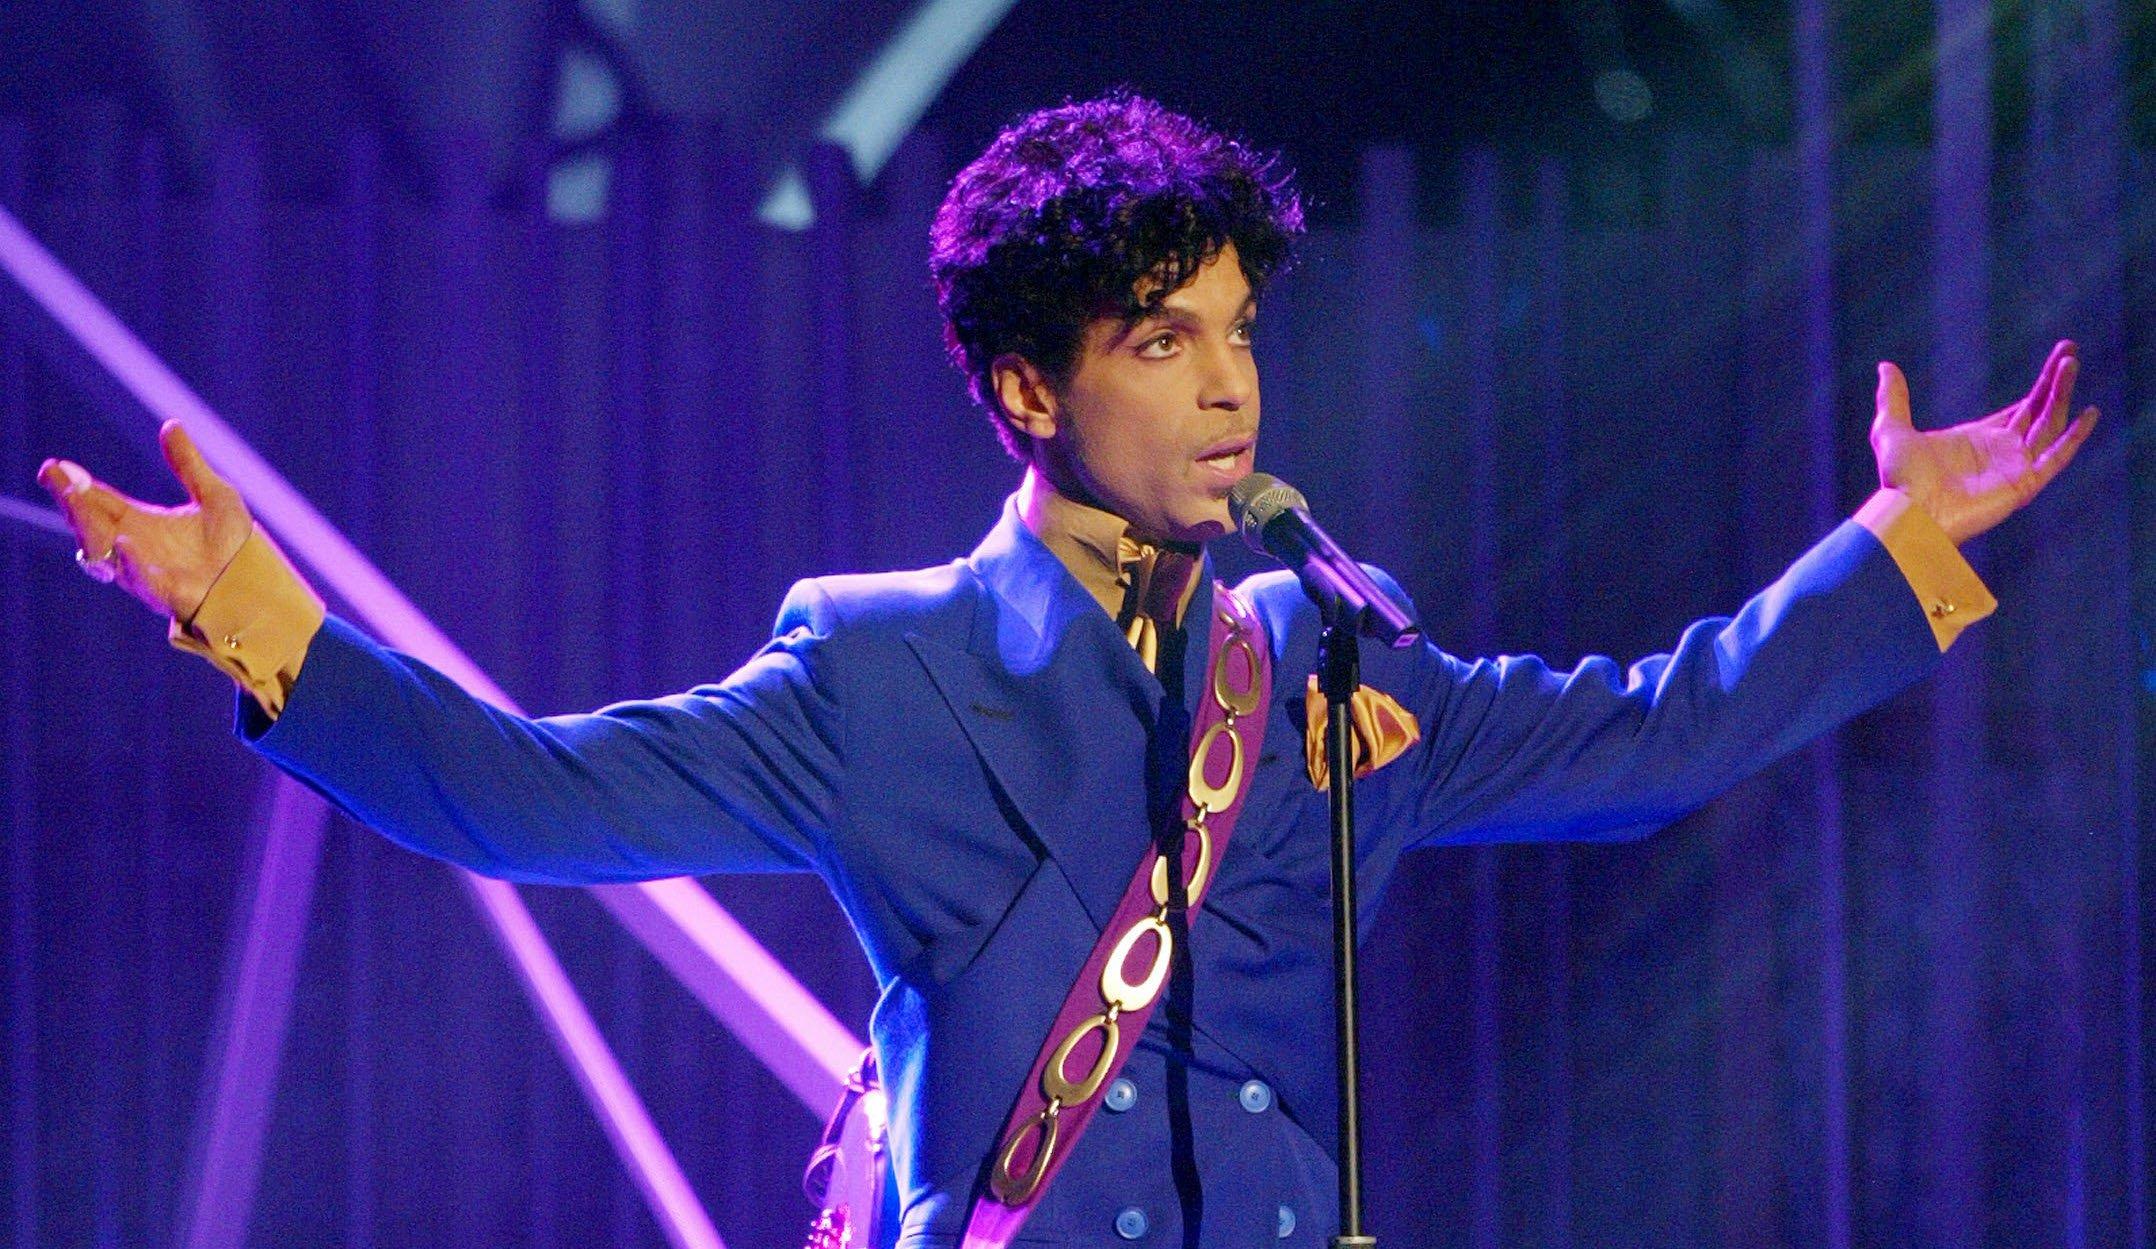 Prince at the 2004 GRAMMYs